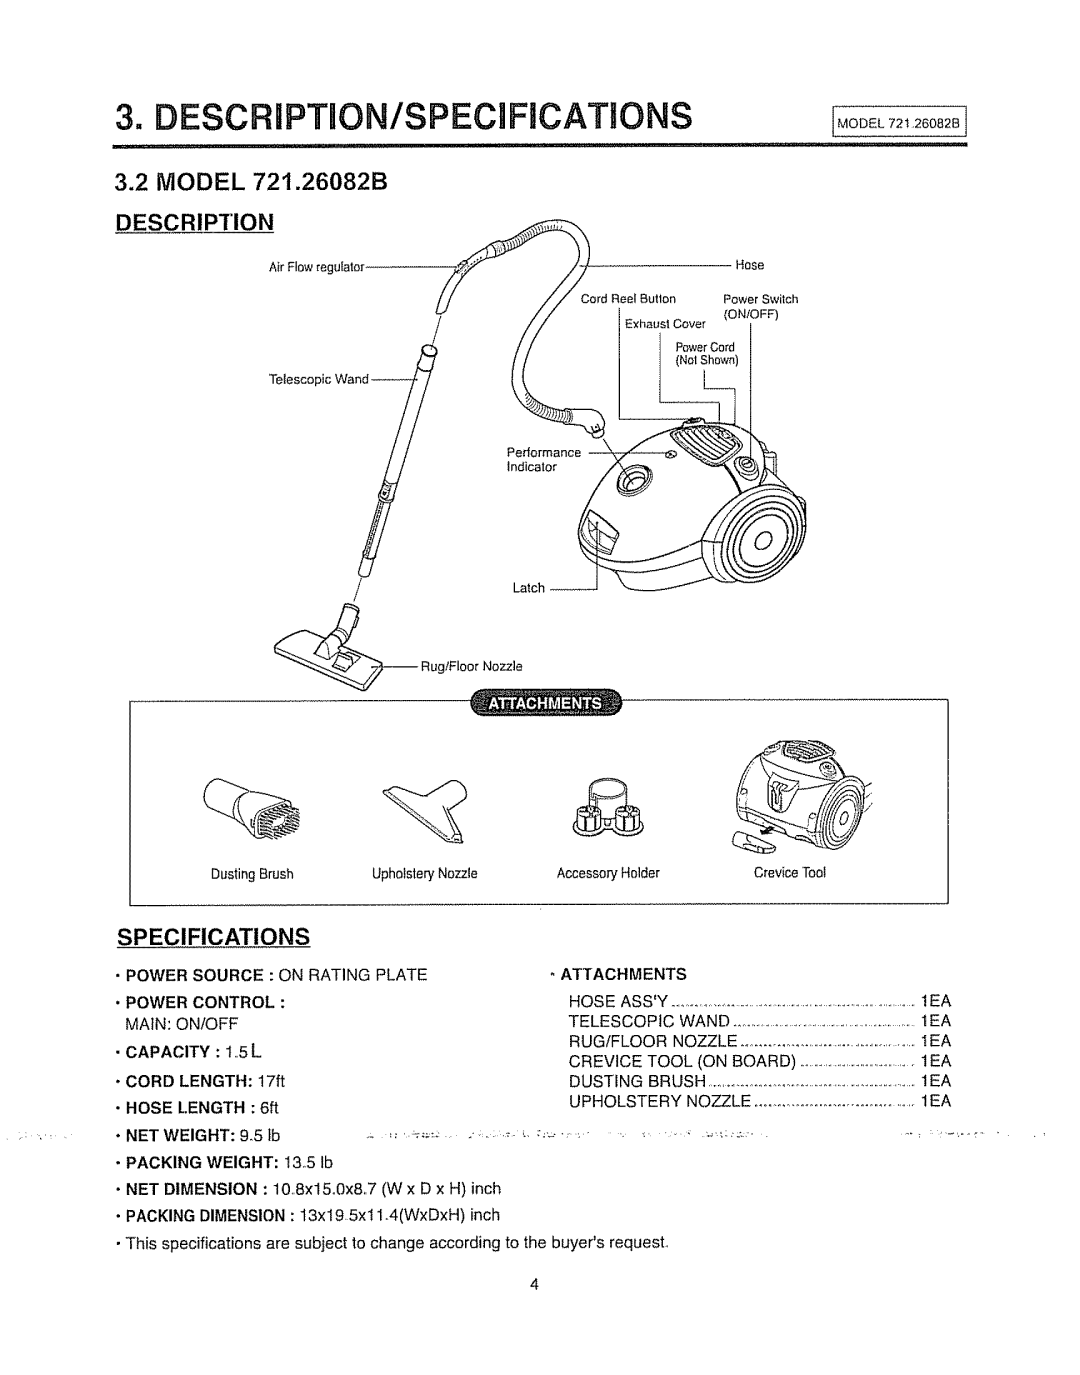 Sears 721.26082B manual Description/Specifications, Packing Weight I3..5 Ib 